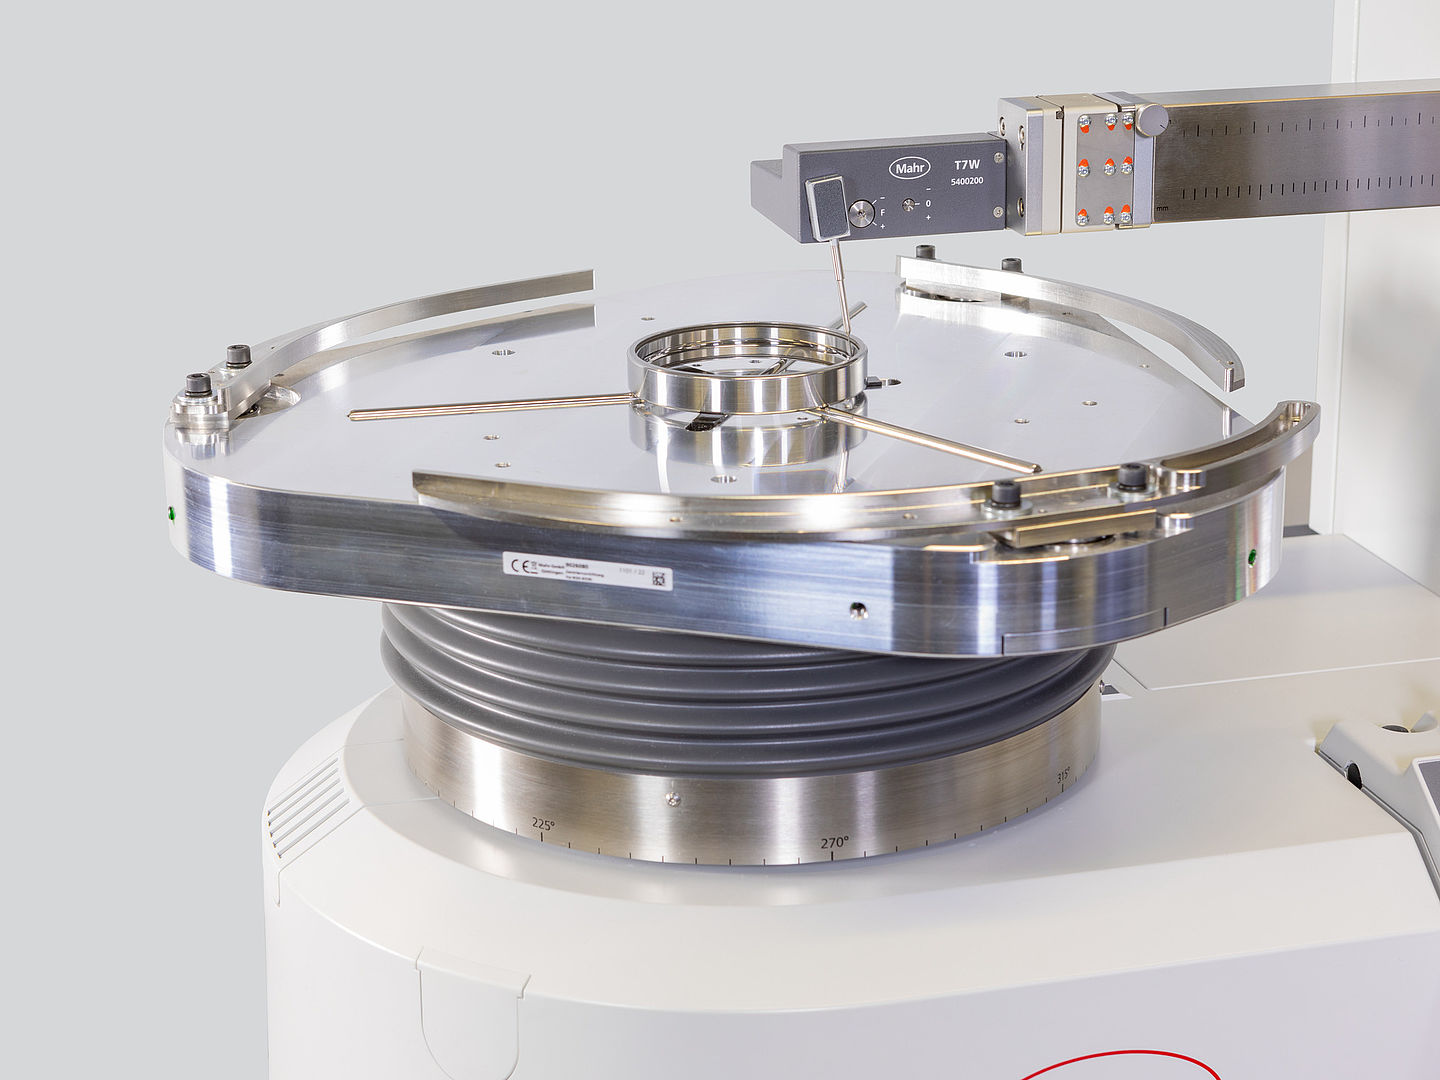 The device centers bearing rings with a diameter of 20 to 330 millimeters.